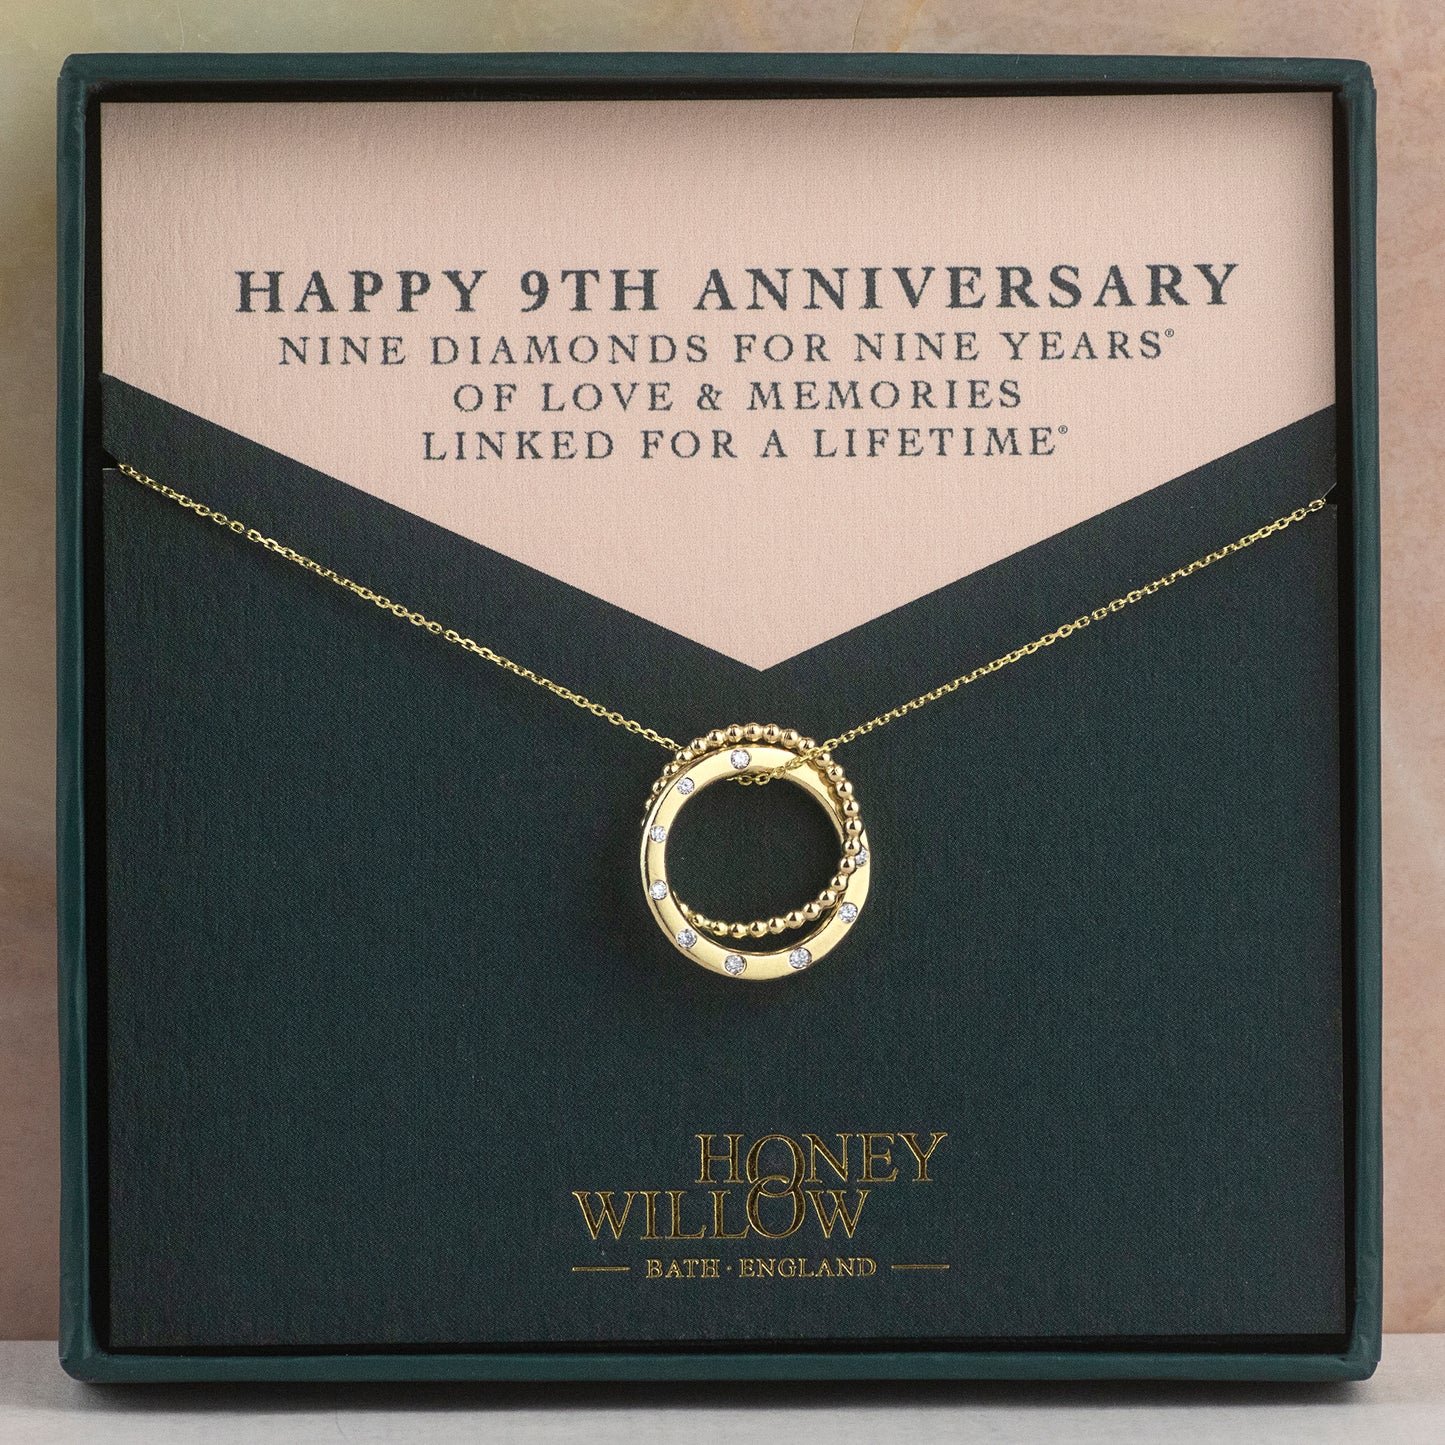 9th Anniversary Necklace - 9 Diamonds for 9 Years - 9kt Gold